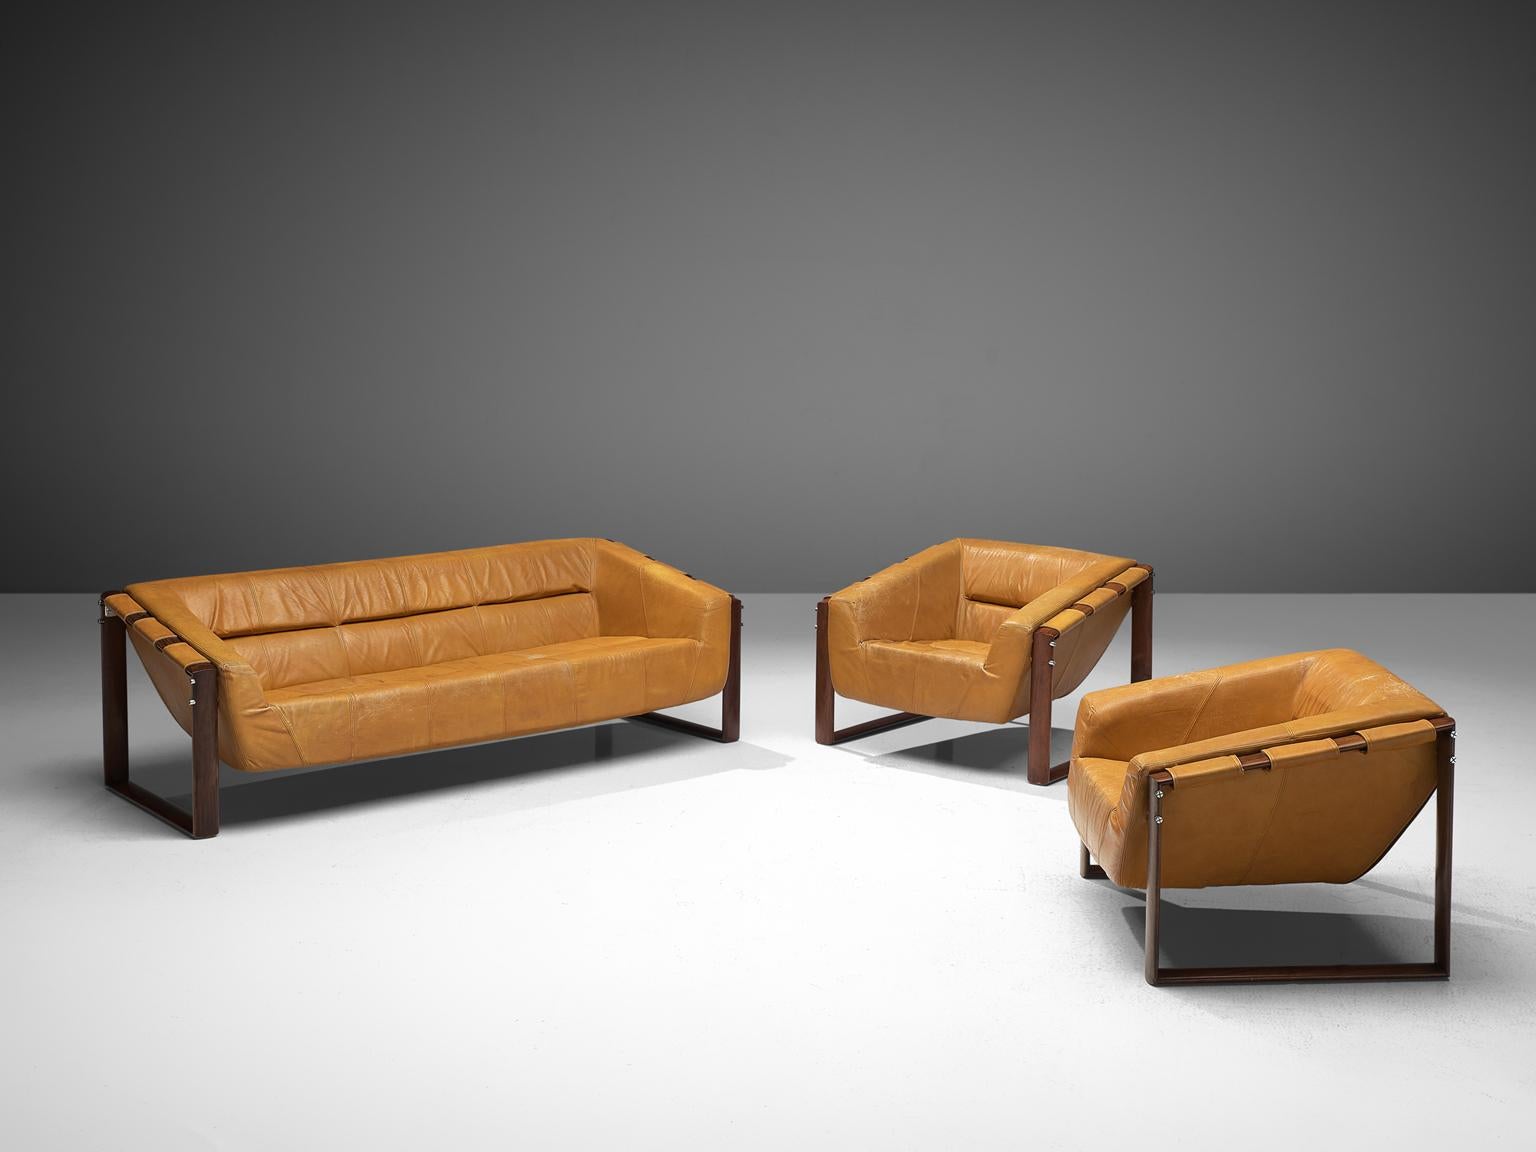 Percival Lafer, living room set, leather and rosewood, Brazil, late 1960s.

A wonderful lounge set by Brazilian designer Percival Lafer, consisting of two lounge chairs and one sofa. Every piece of furniture consists of two geometric shaped